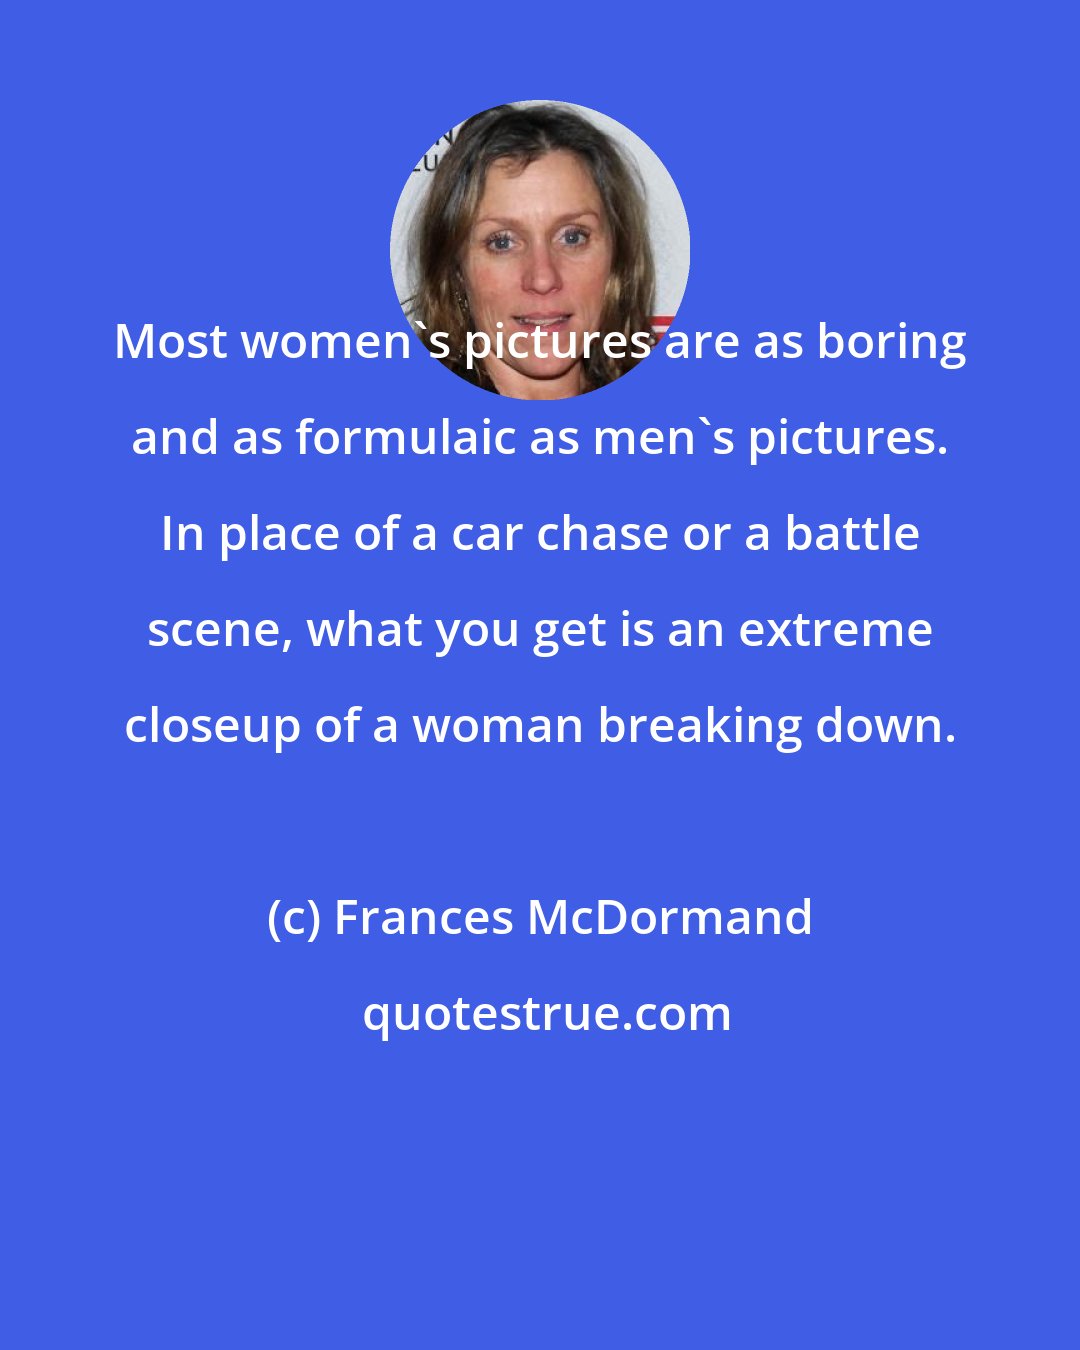 Frances McDormand: Most women's pictures are as boring and as formulaic as men's pictures. In place of a car chase or a battle scene, what you get is an extreme closeup of a woman breaking down.